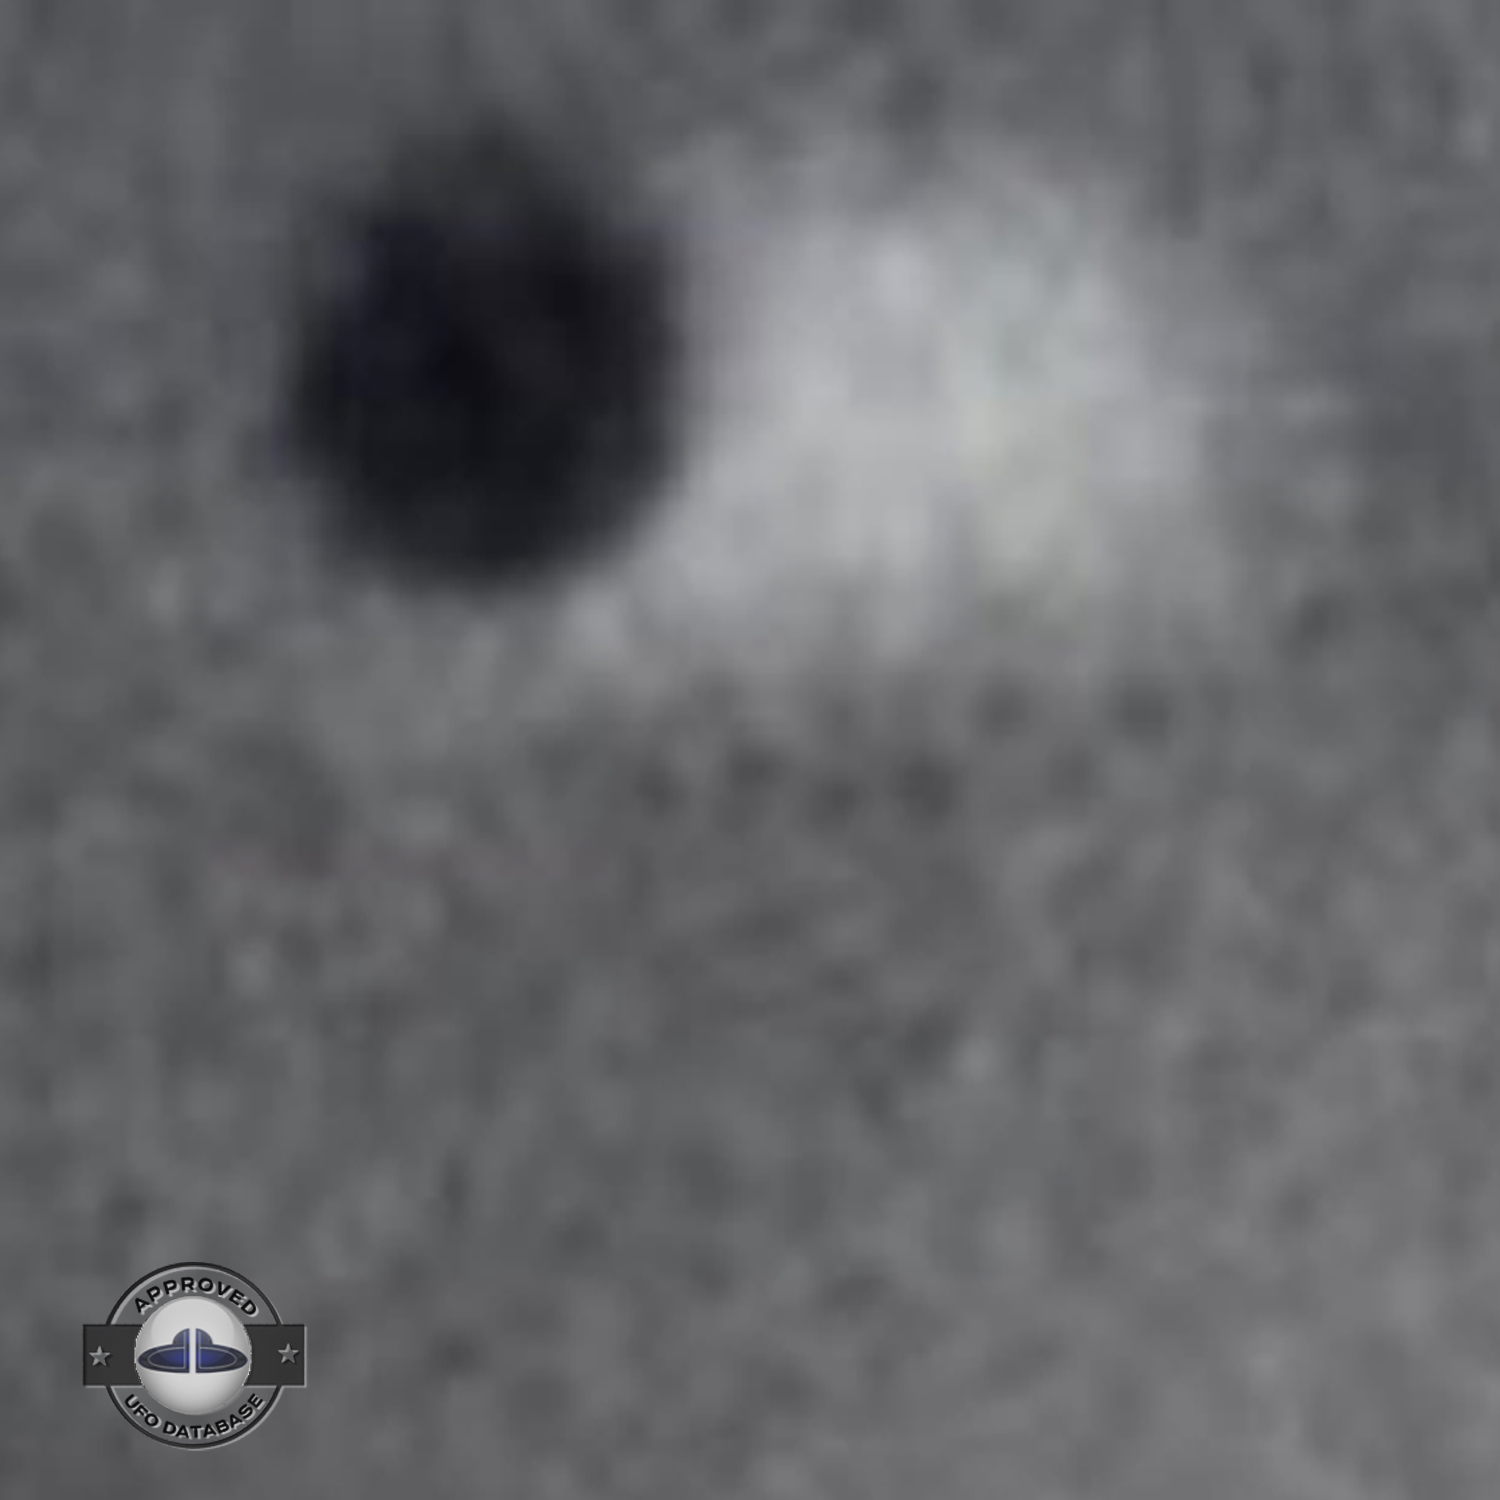 UFO is rotating on its own, by the blur aspect of the object | Japan UFO Picture #147-6